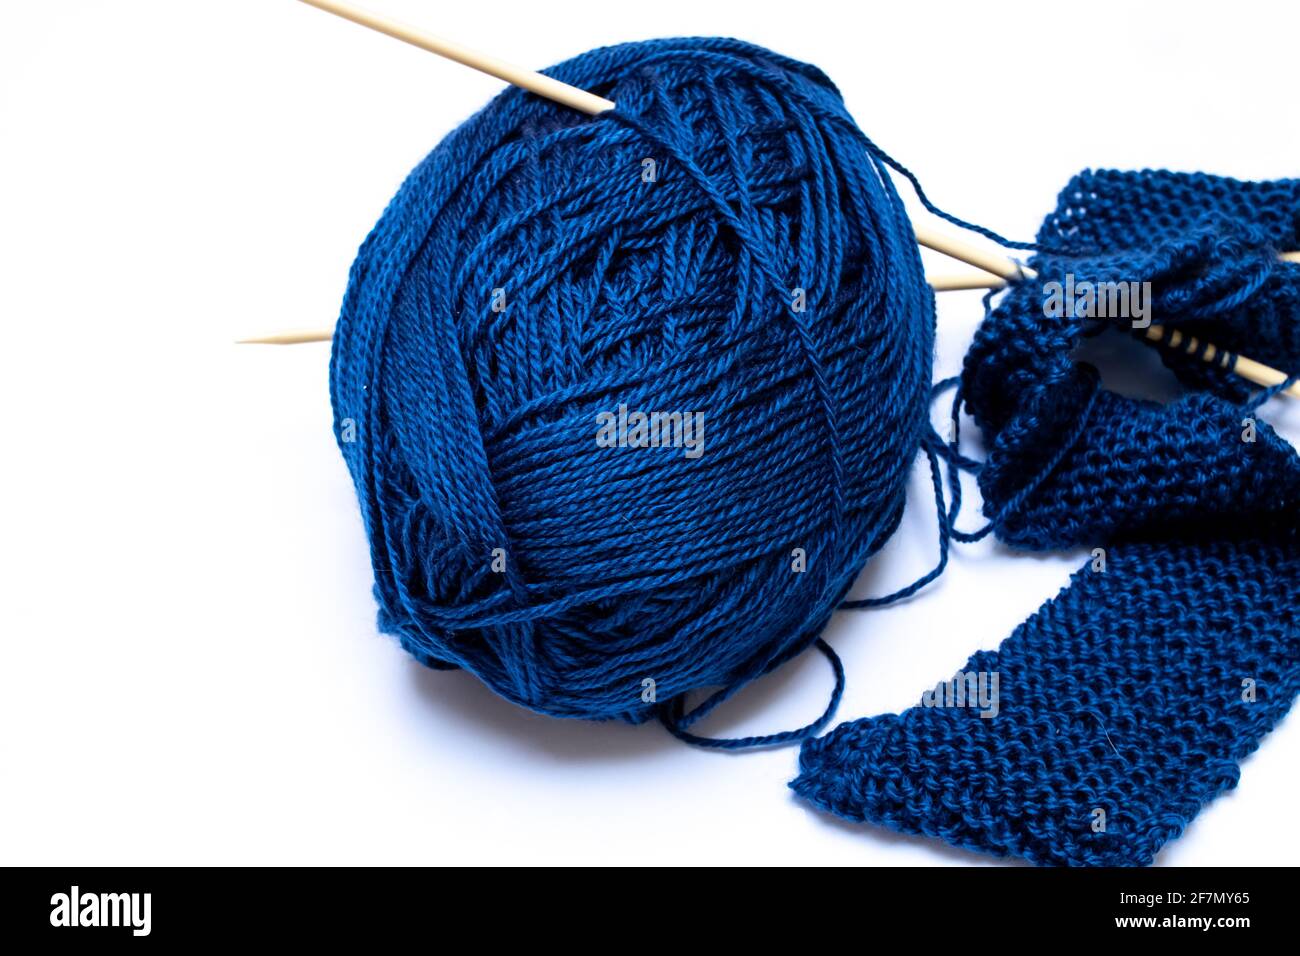 Midnight blue yarn, tangled and slightly astray next to beige knitting needles holding together a small classic pearl knit scarf. Stock Photo